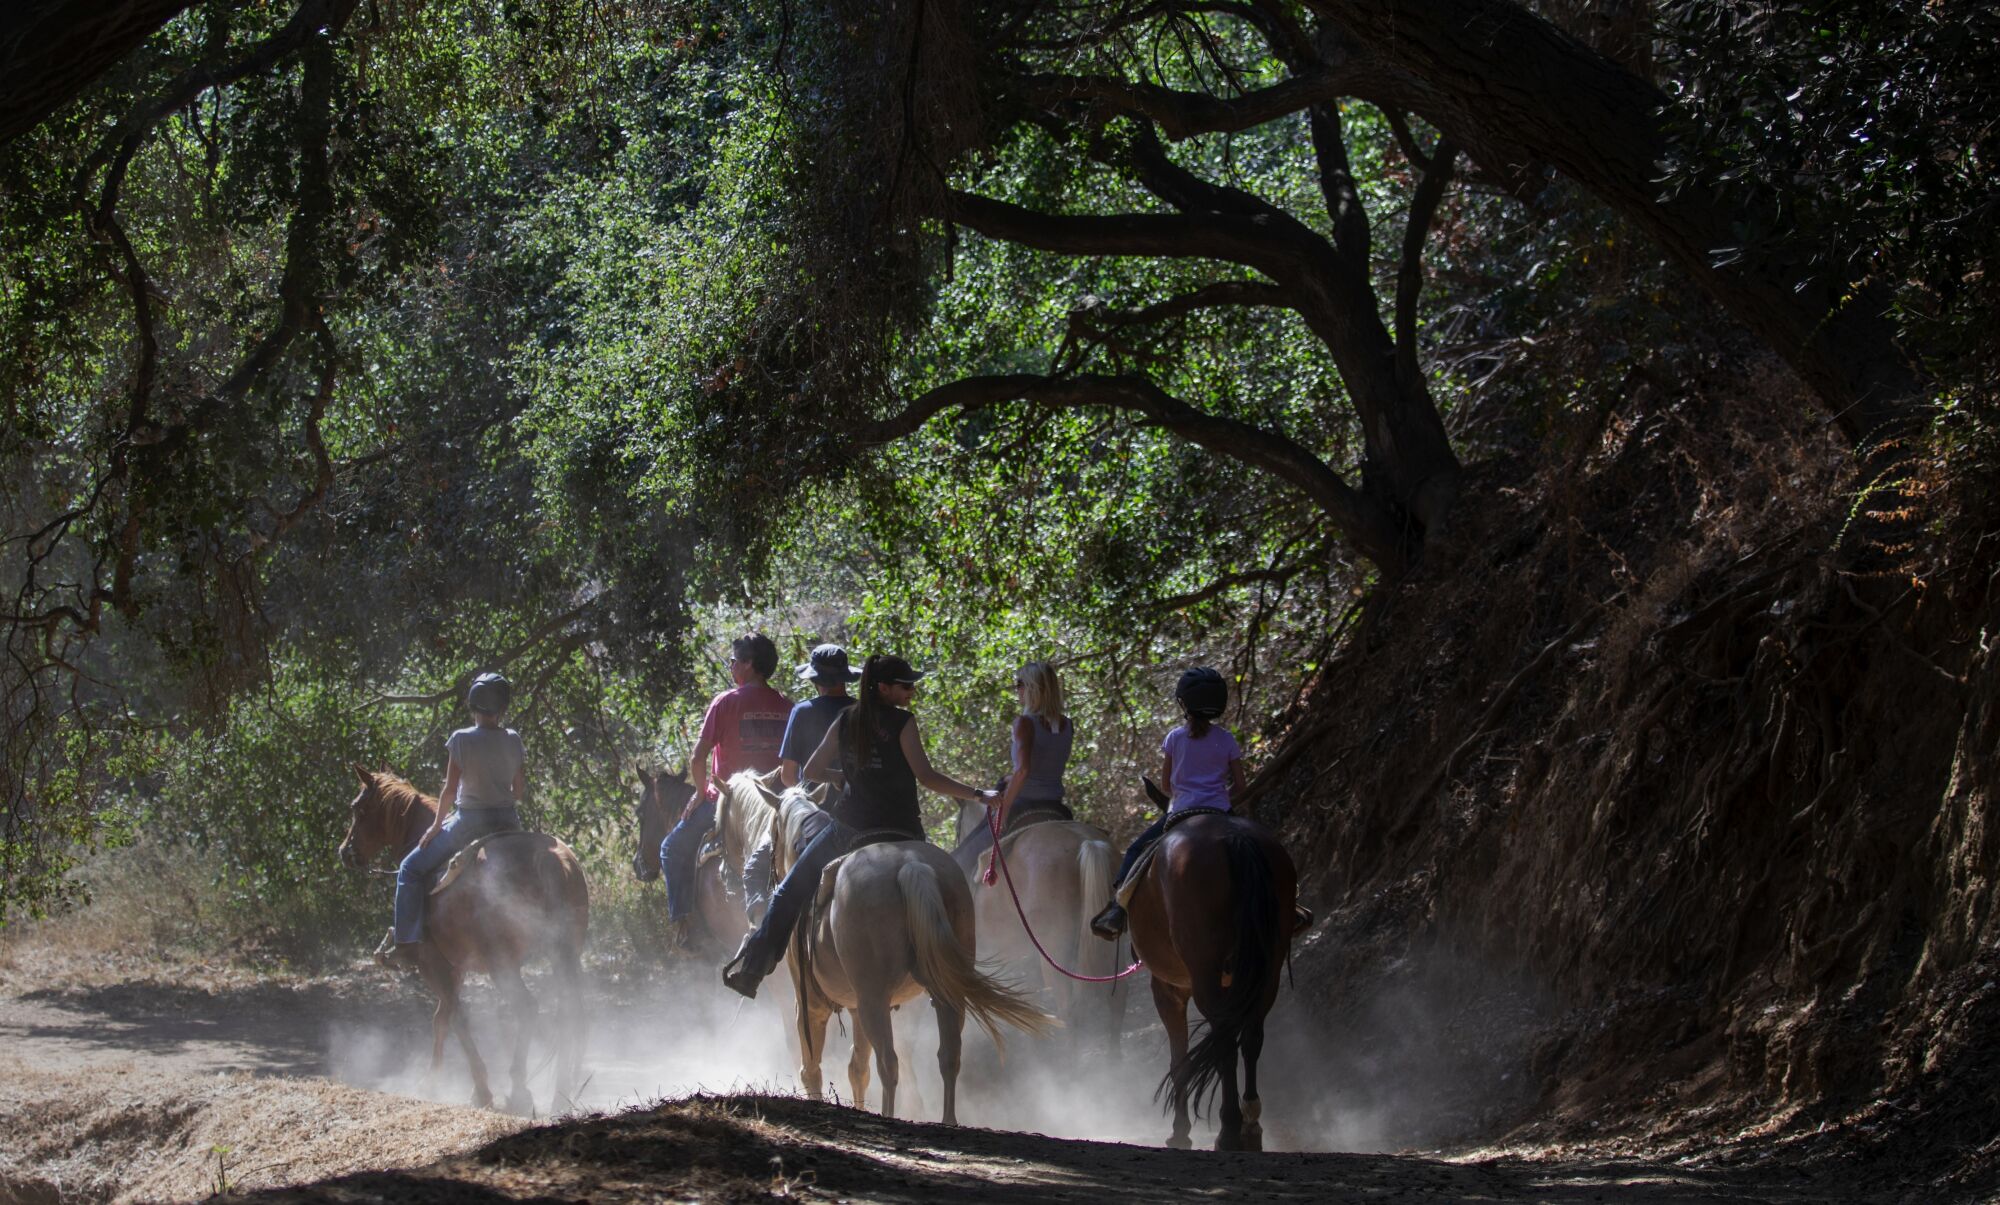 People riding horses under trees.